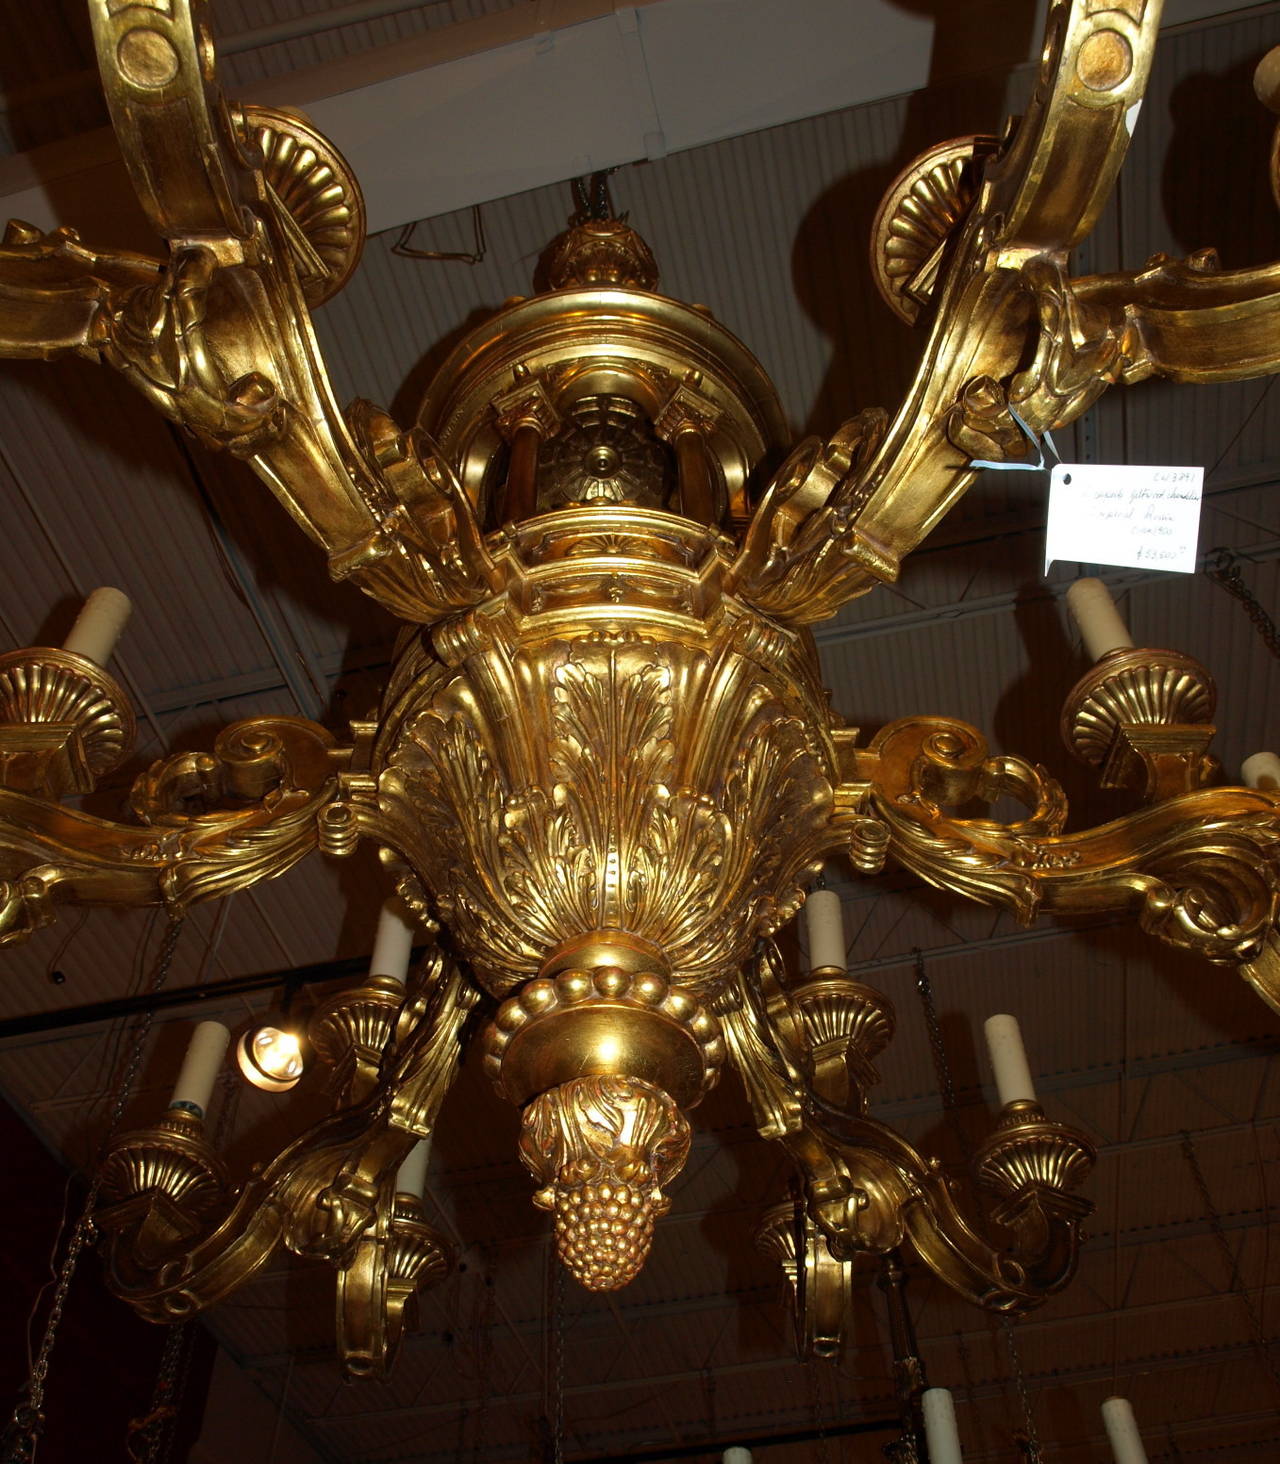 Incredible hand carved Russian gilded wood chandelier with architectural central form featuring neoclassical columns and having 18 lights, in a monumental scale.